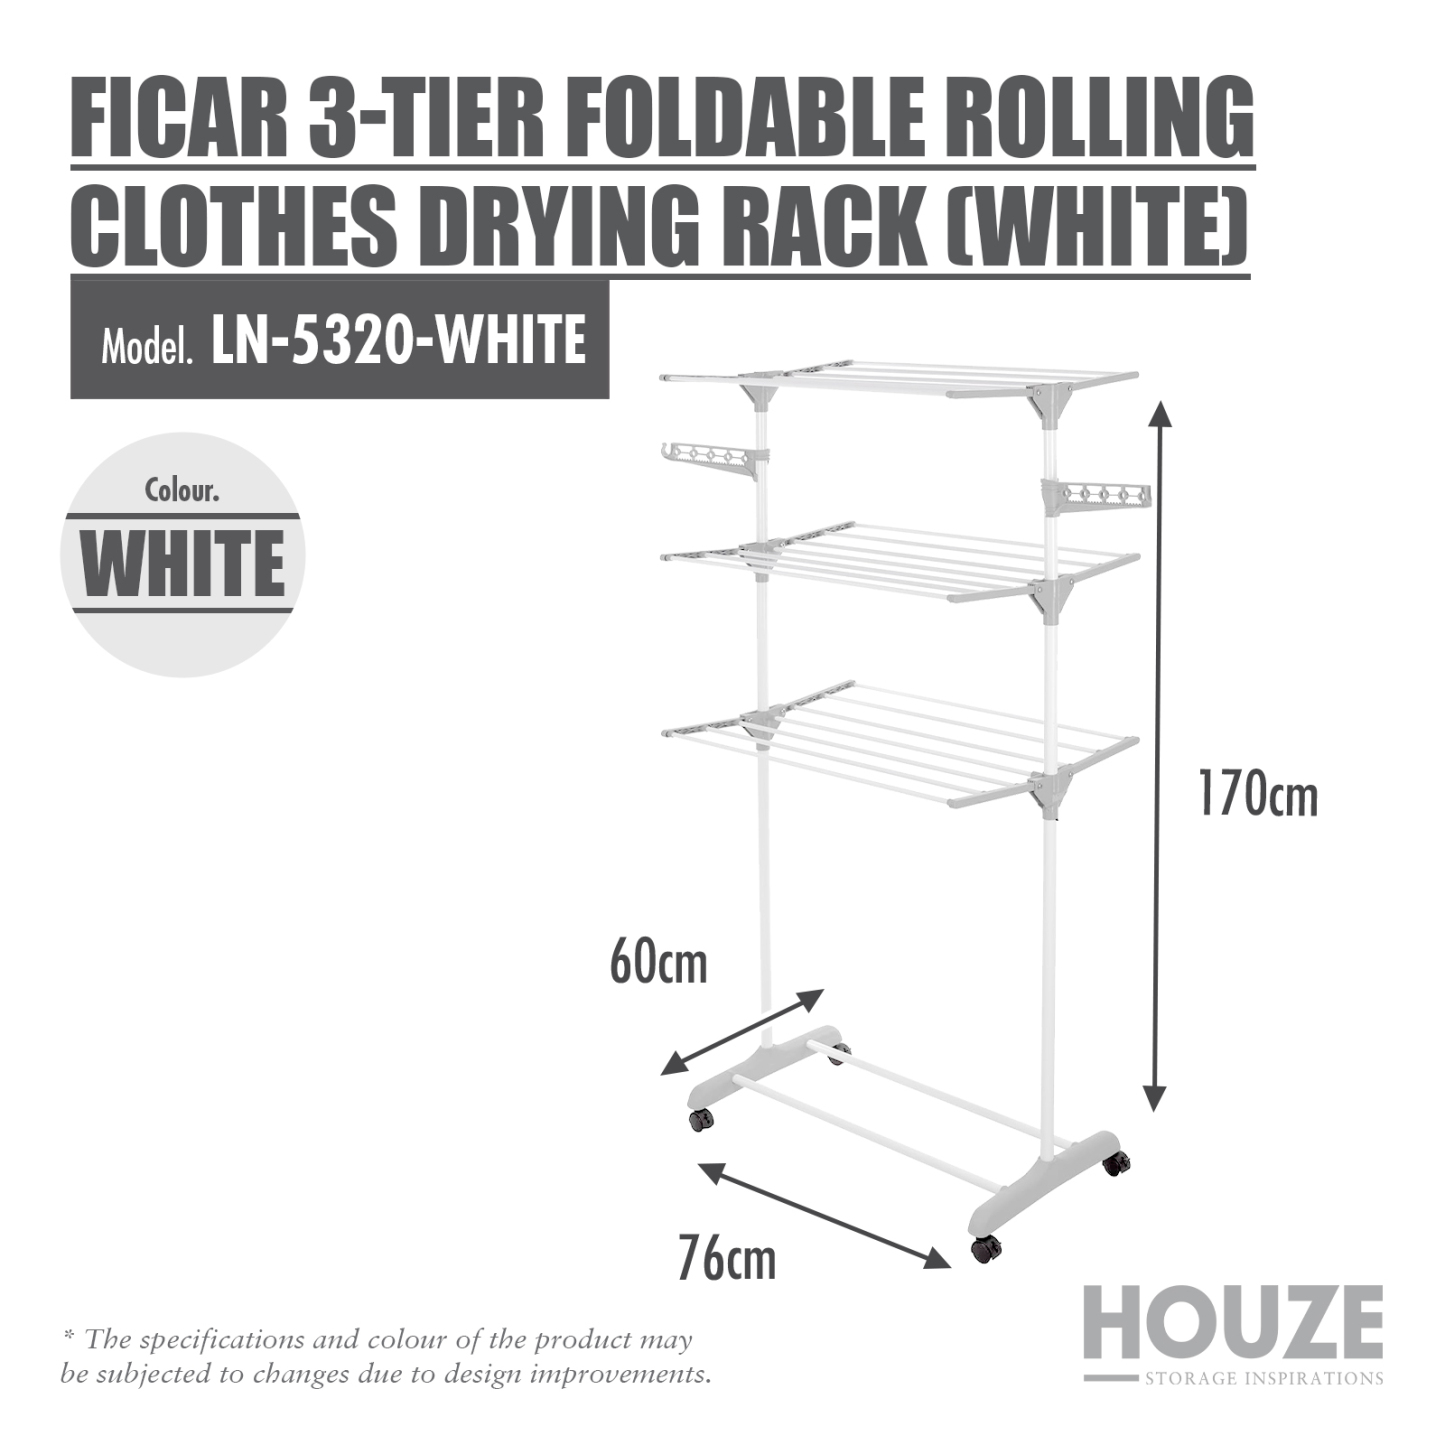 Ficar 3-Tier Foldable Rolling Clothes Drying Rack